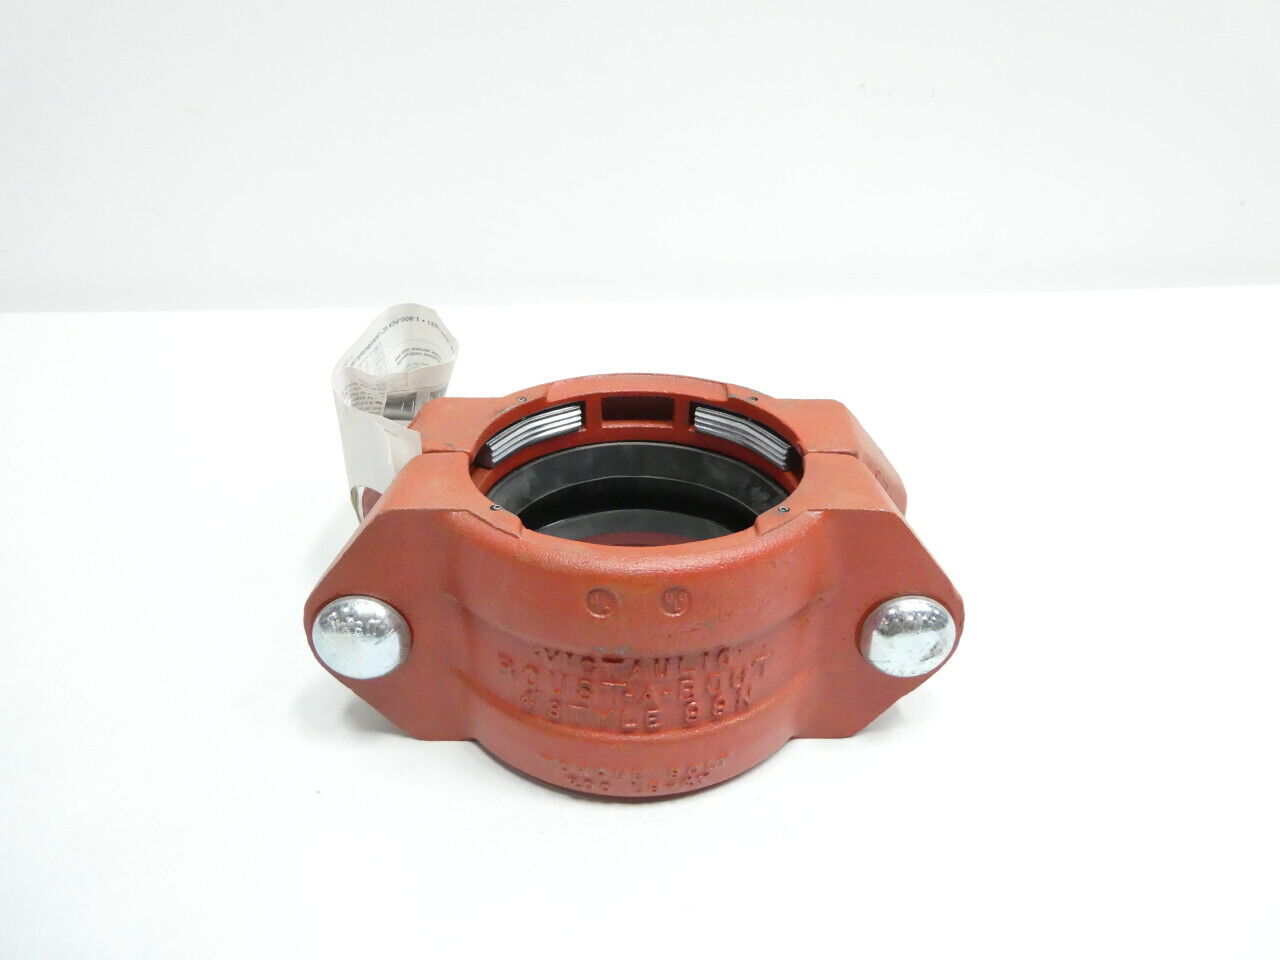 Victaulic 99N Roust-a-bout Iron Pipe Coupling 4in